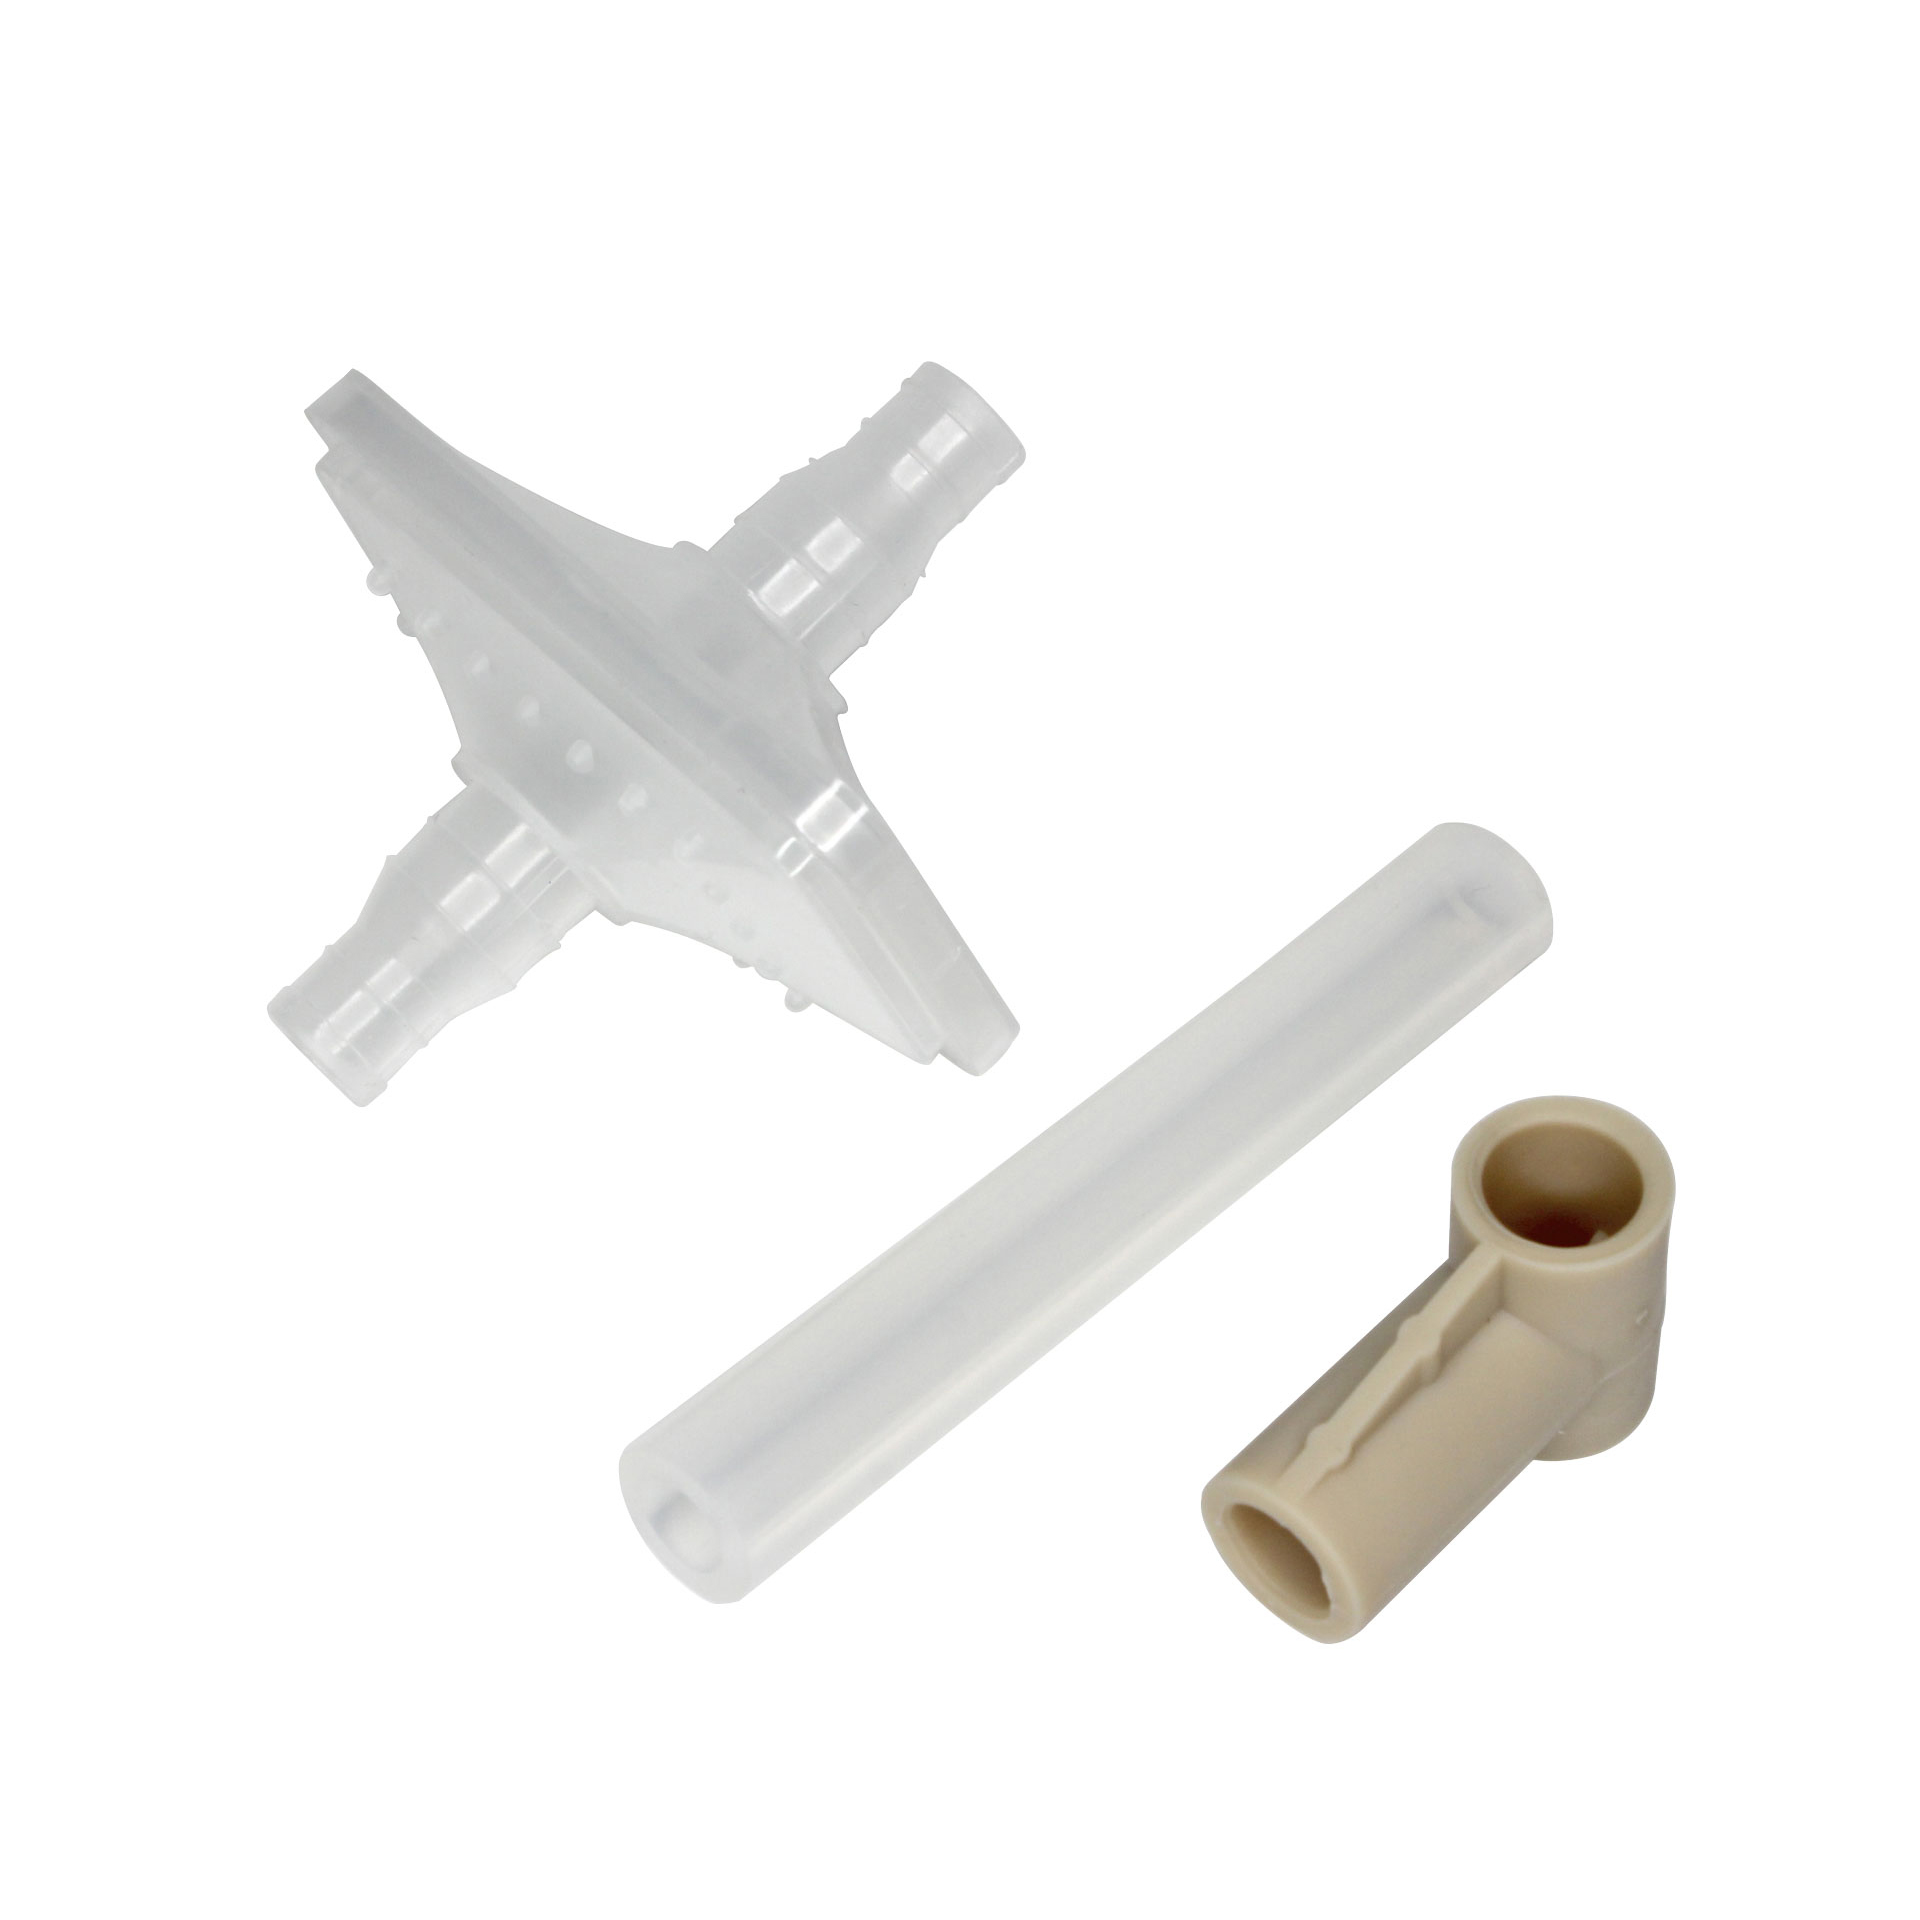 Photograph of RES024-KIT - Suction Component Kit: 1 RES024 Connector Tube 3.5in, 1 BF3812 Bacteria Filter, 1 RES028 Rubber Elbow